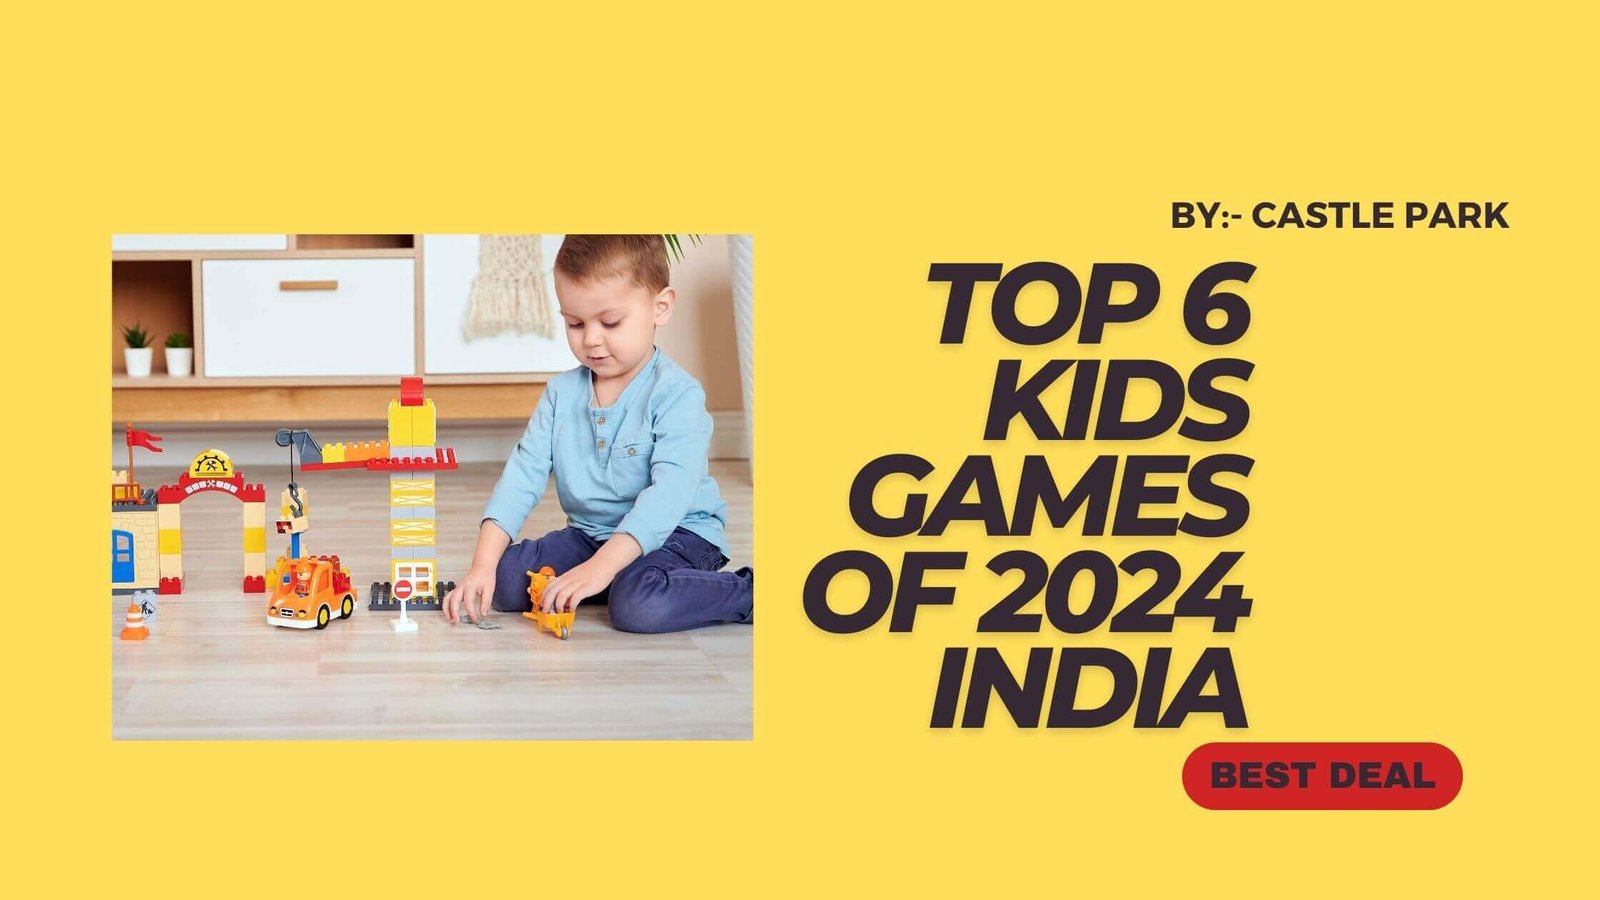 TOP 6 KIDS GAMES OF 2024 INDIA